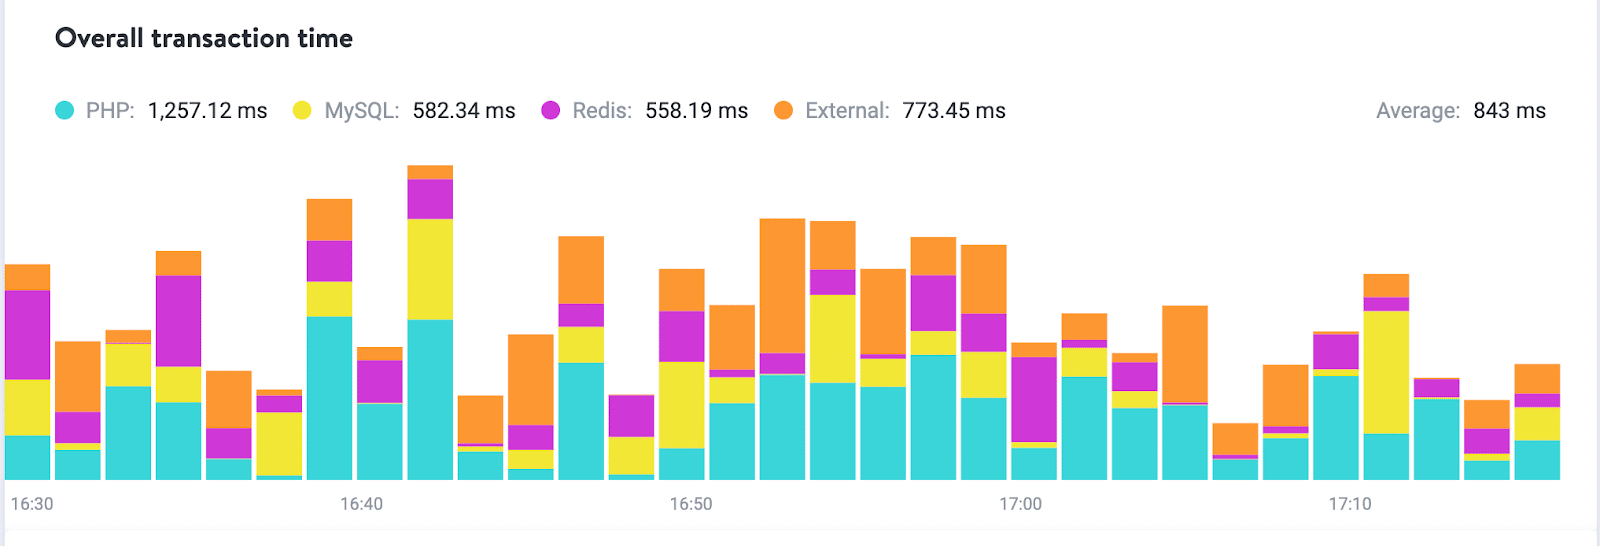 A colorful bar graph comparing the overall transaction time of PHP, MySQL, Reddis, and external (other) in milliseconds.